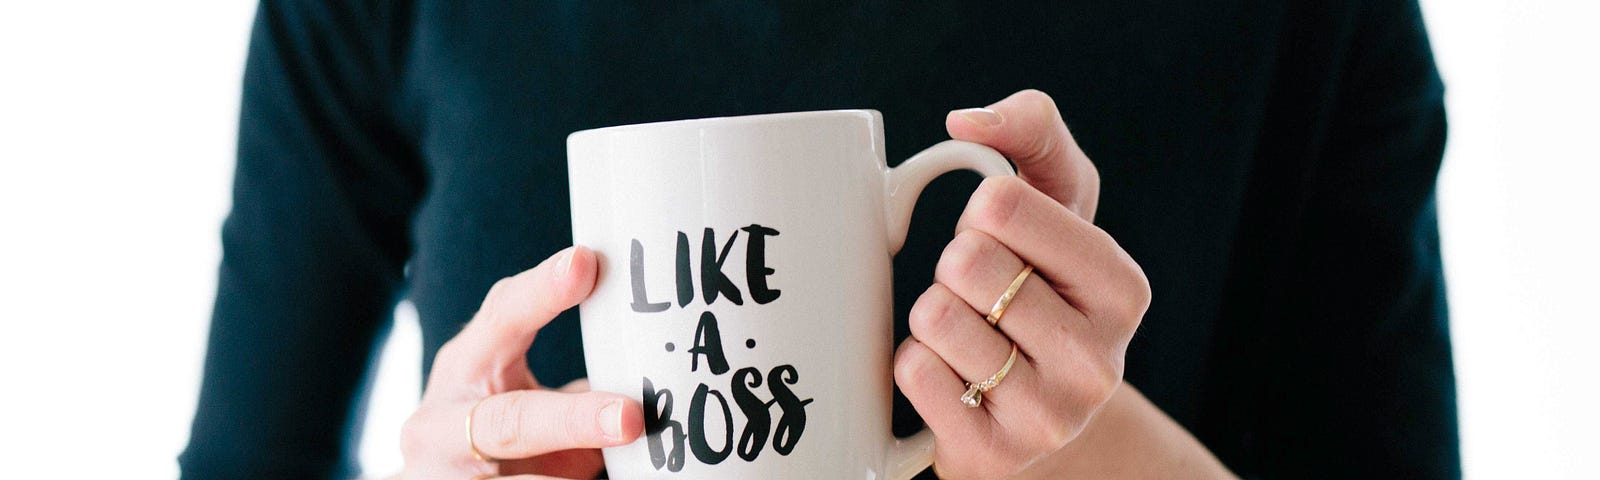 Woman’s hands holding a white mug that say, “Like A Boss”.